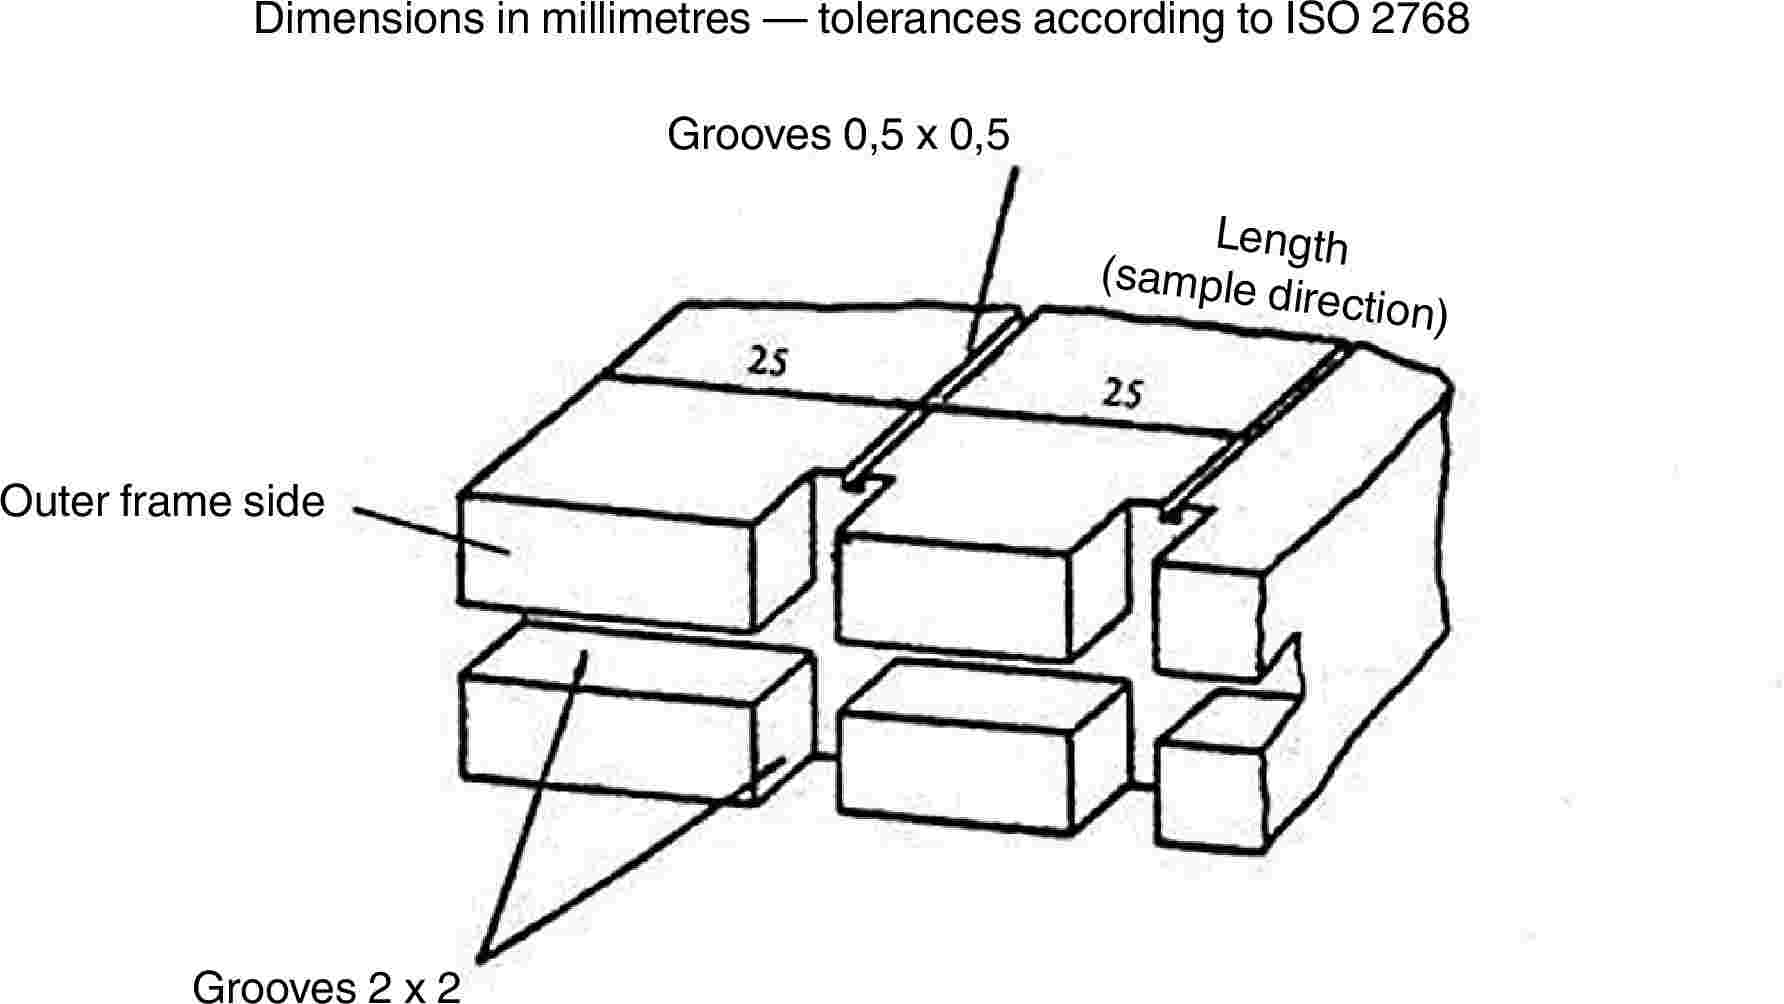 Dimensions in millimetres — tolerances according to ISO 2768Grooves 0,5 x 0,5Length (sample direction)Outer frame sideGrooves 2 x 2